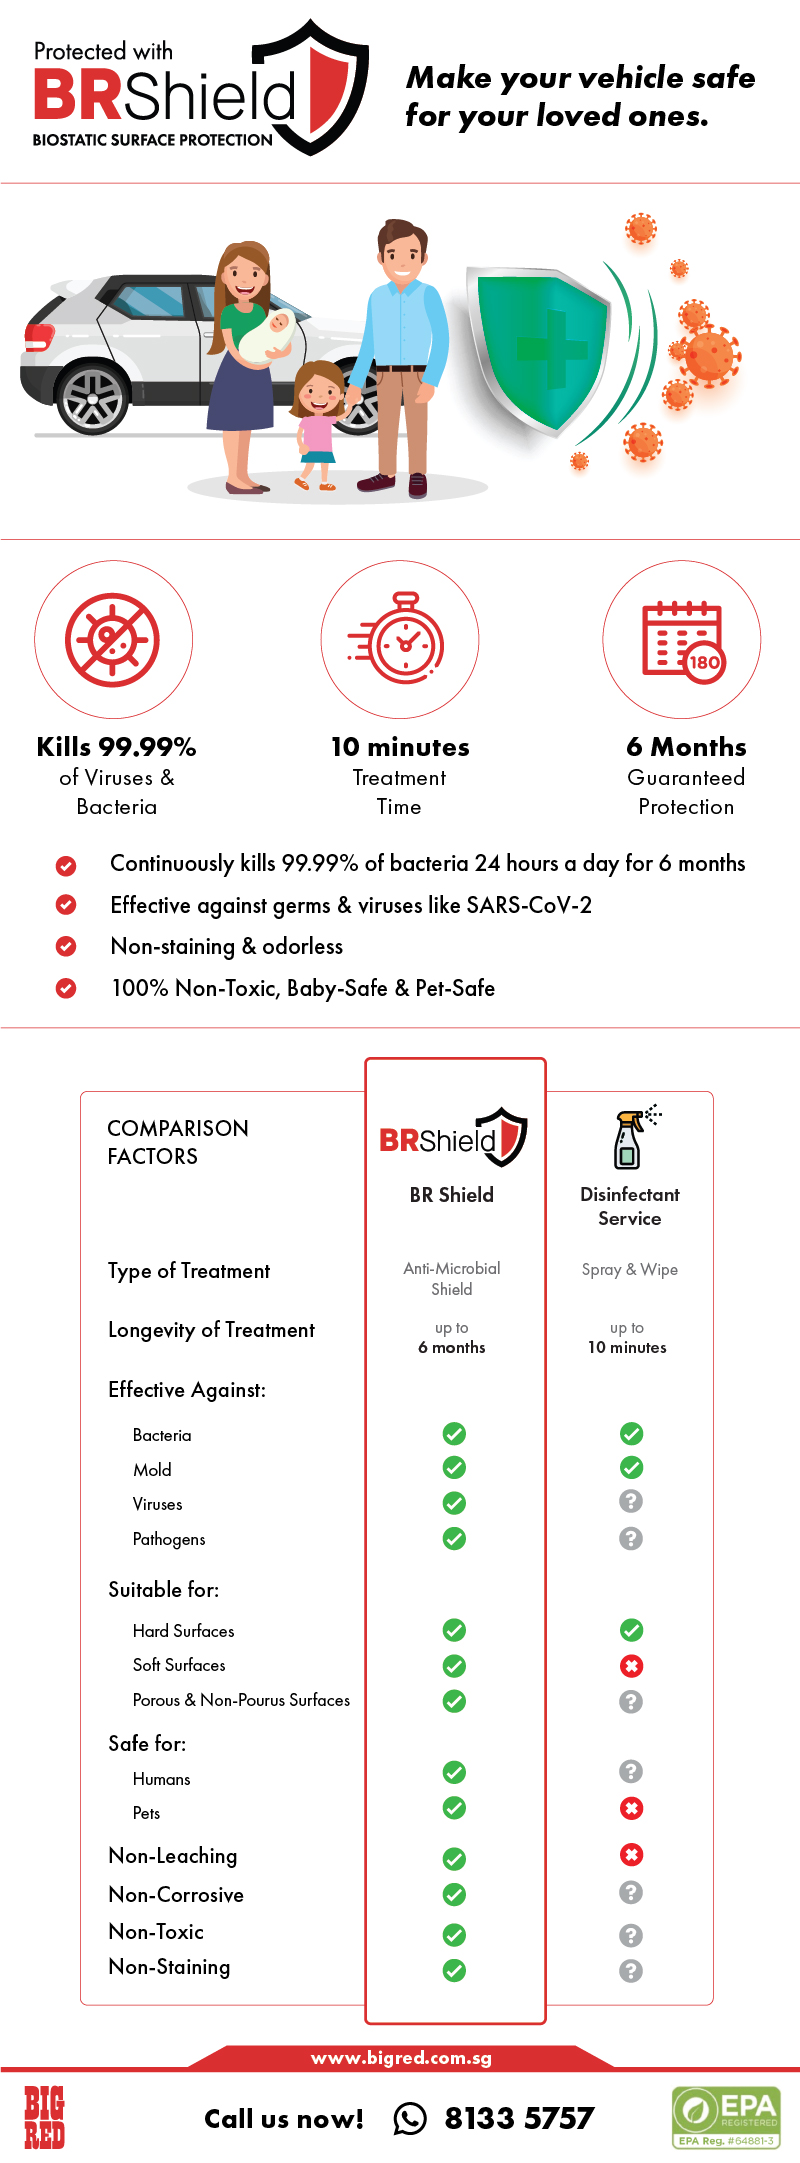 Infographic | BR Shield Bio Surface Protectant | Make your Vehicle safe for your loved ones